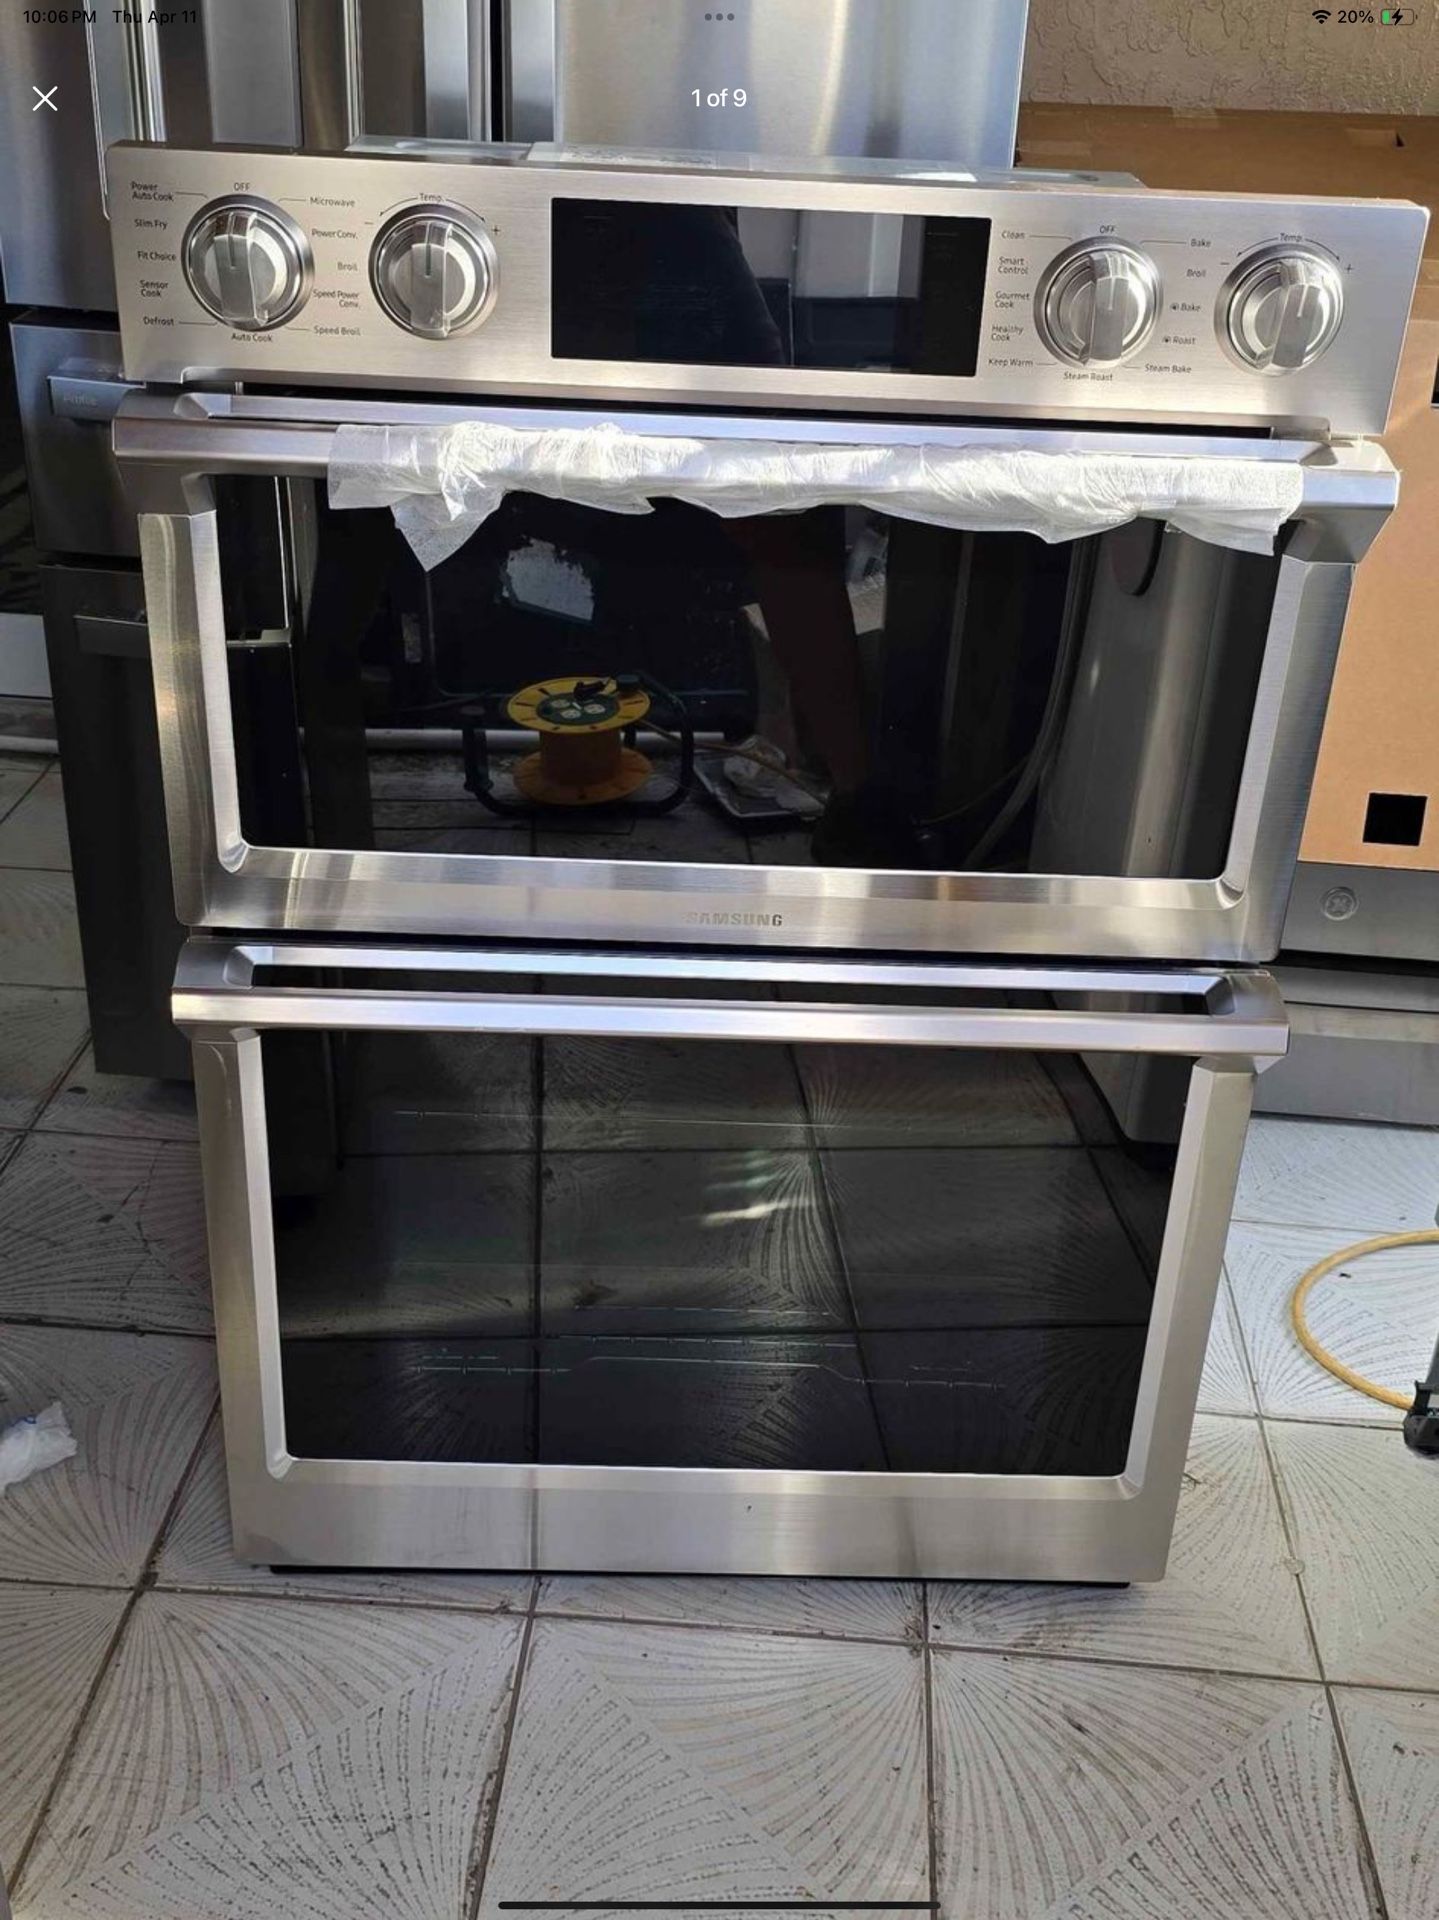 SAMSUNG SMART OVEN MICROWAVE 30 INCHES STAINLESS STEEL,NOT SCRATCH NO DENT LIKE NEW